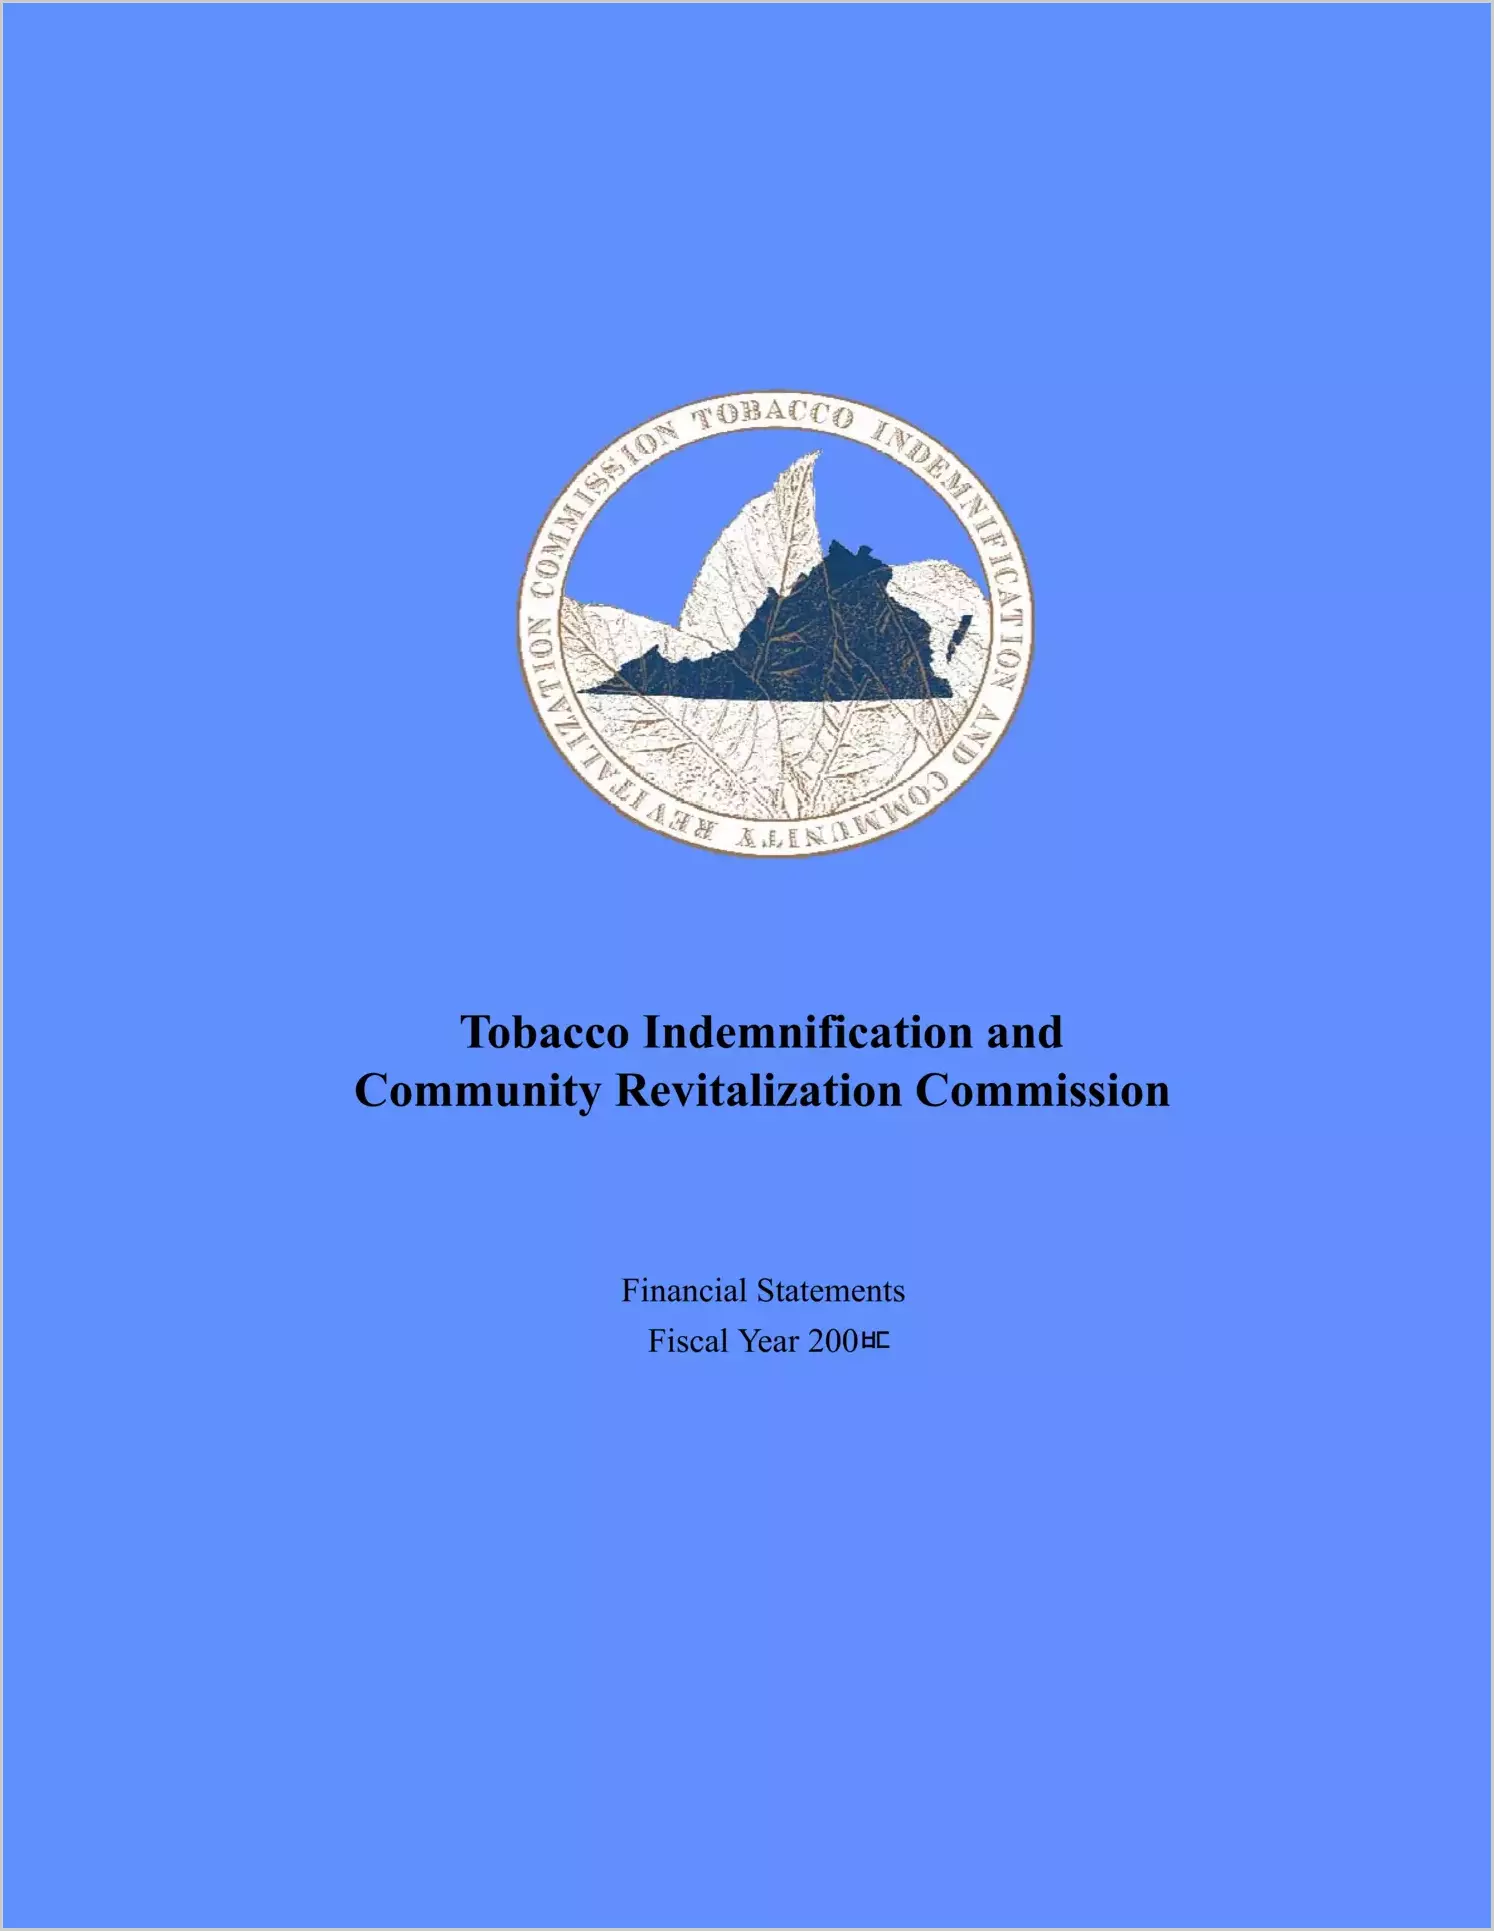 Tobacco Indemnification and Community Revitalization Commission for the year ended June 30, 2009